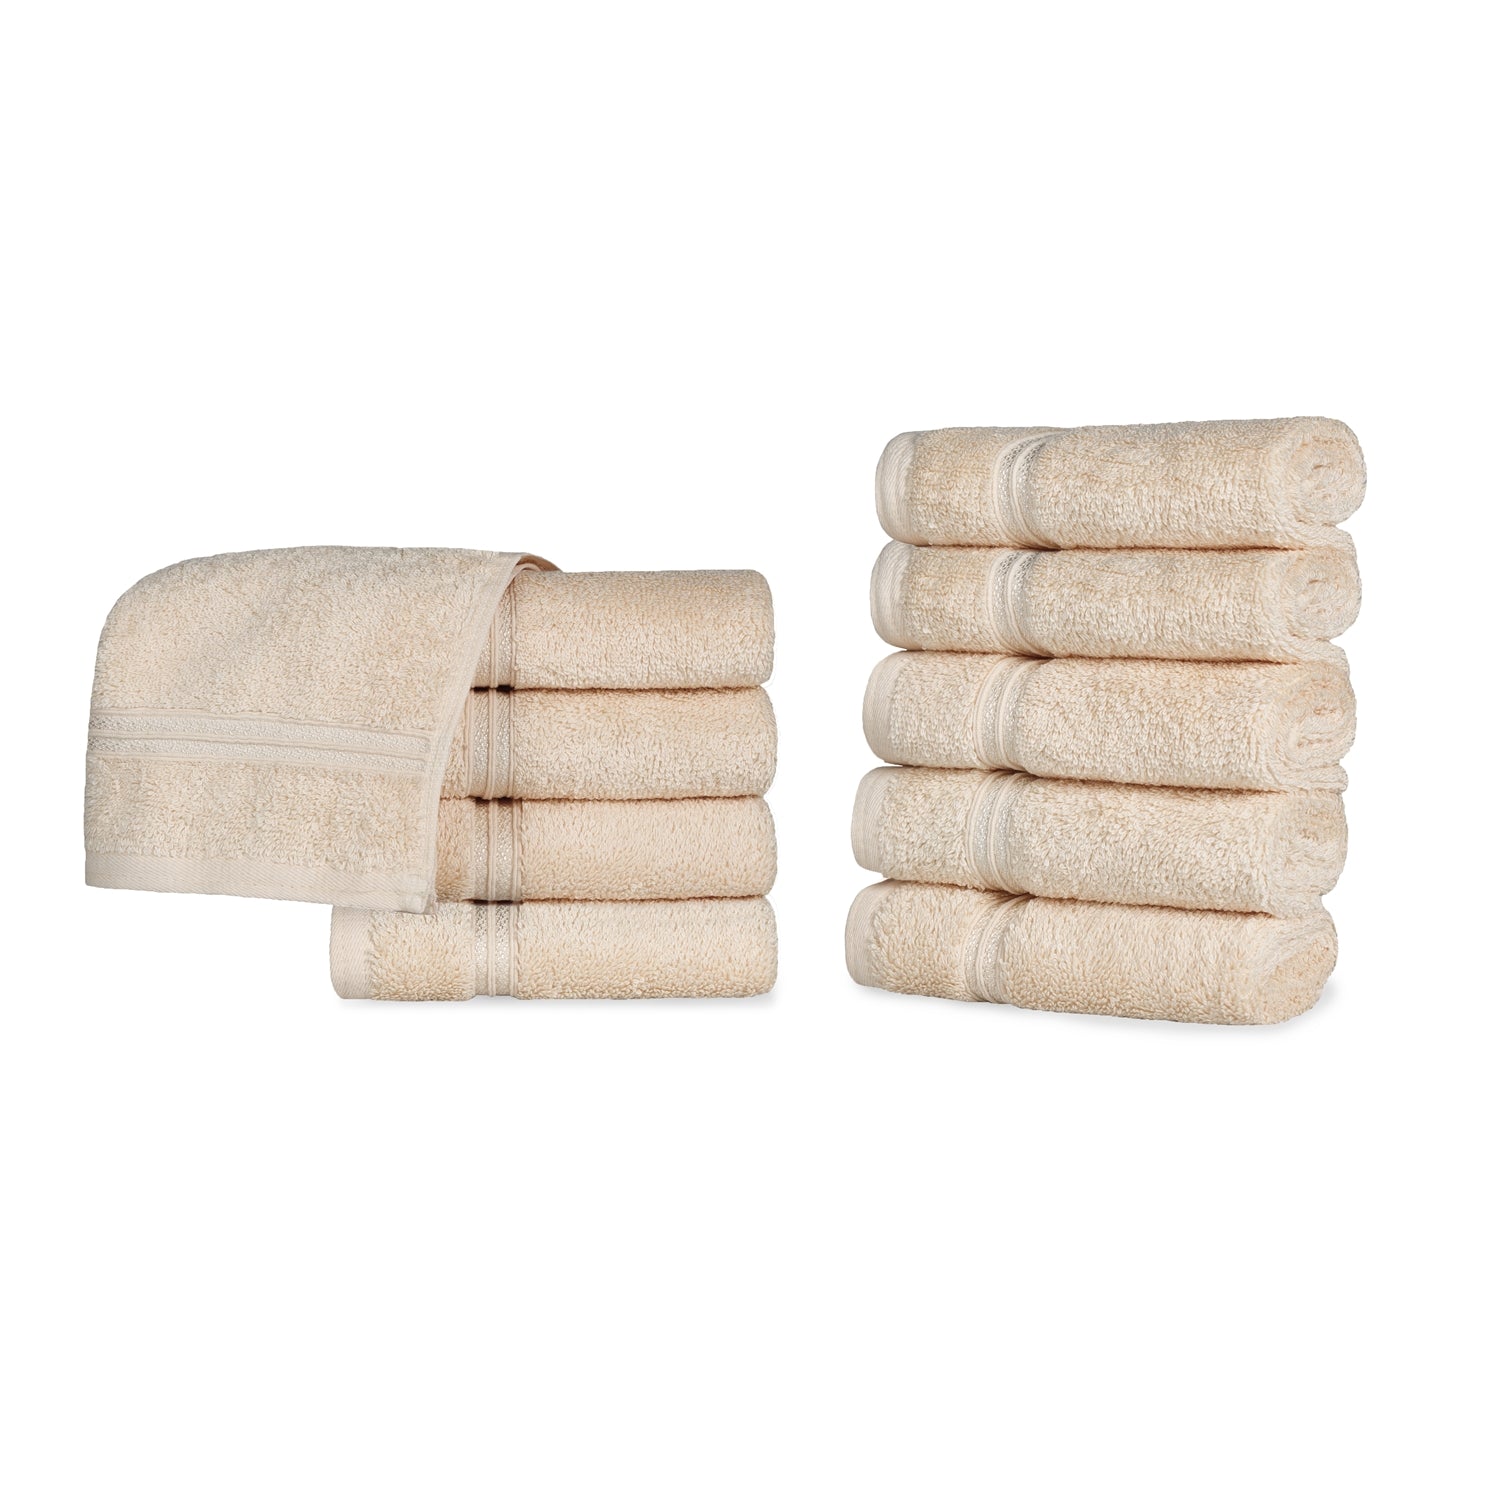 Egyptian Cotton Highly Absorbent Solid Ultra Soft Towel Set - Ivory